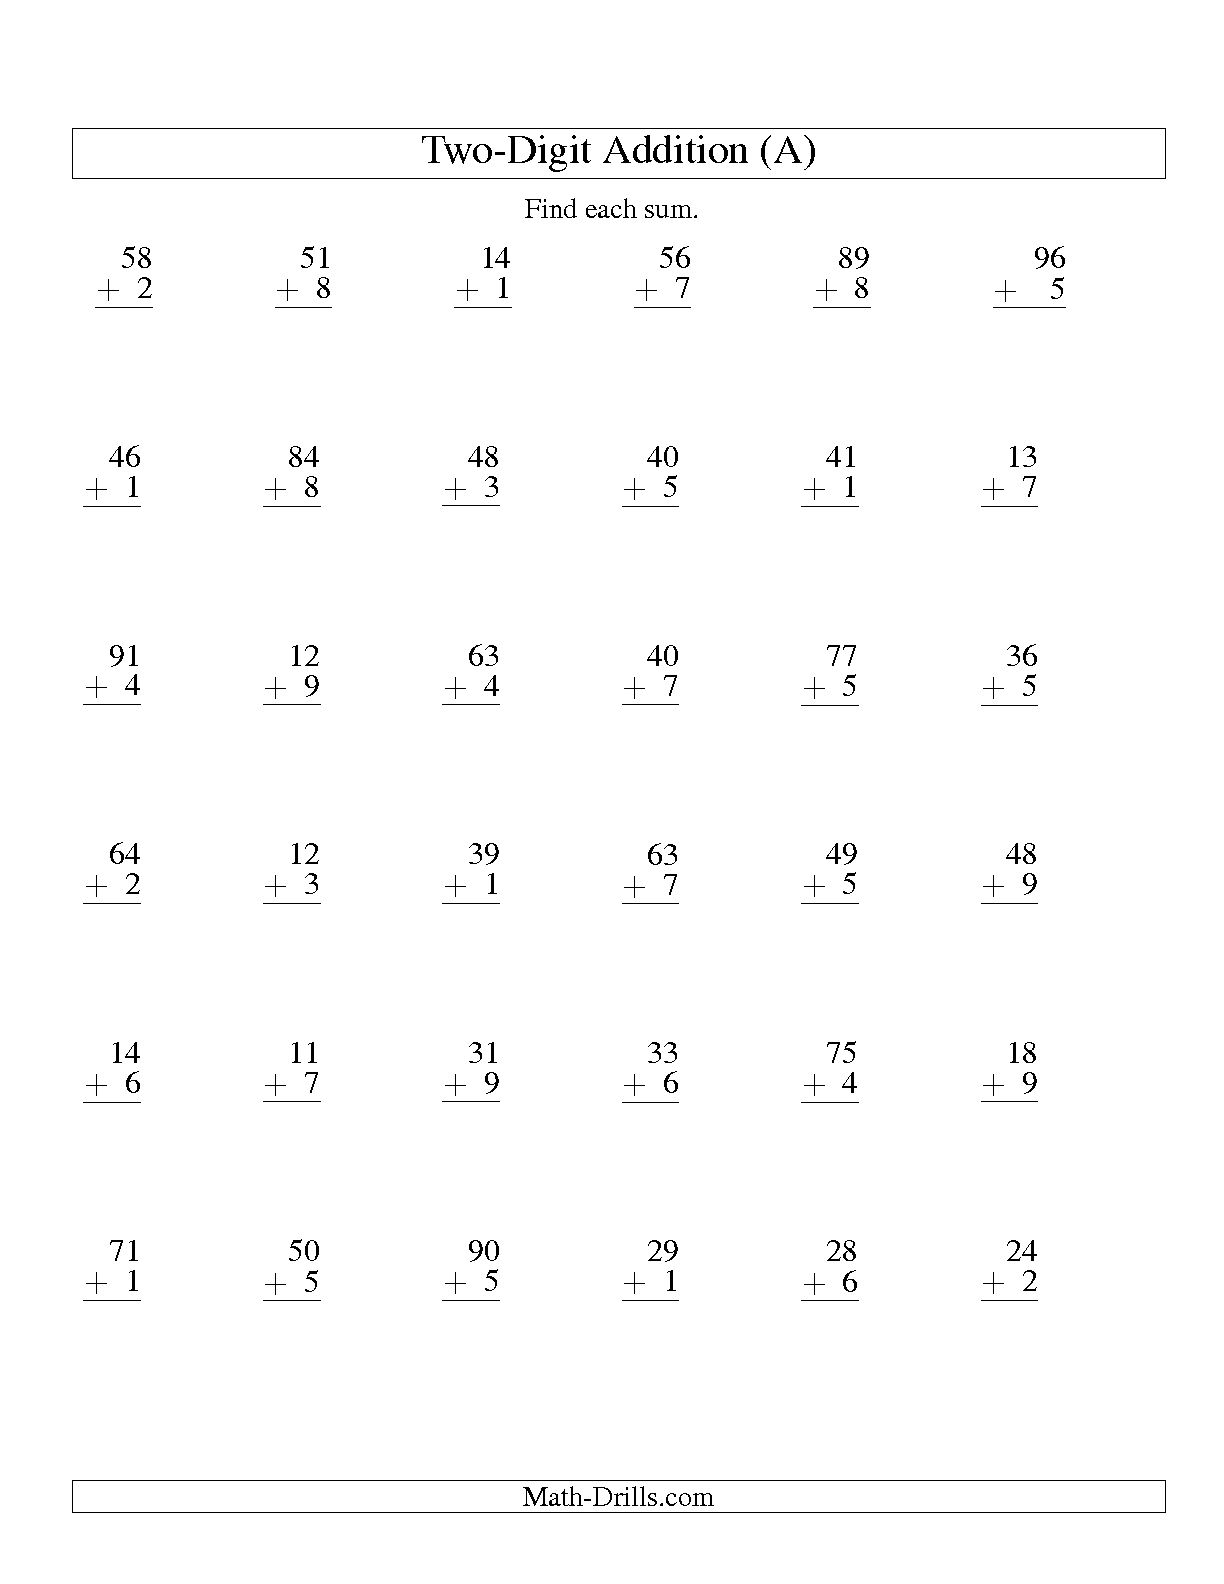 Two-Digit Plus One Digit Addition Worksheets